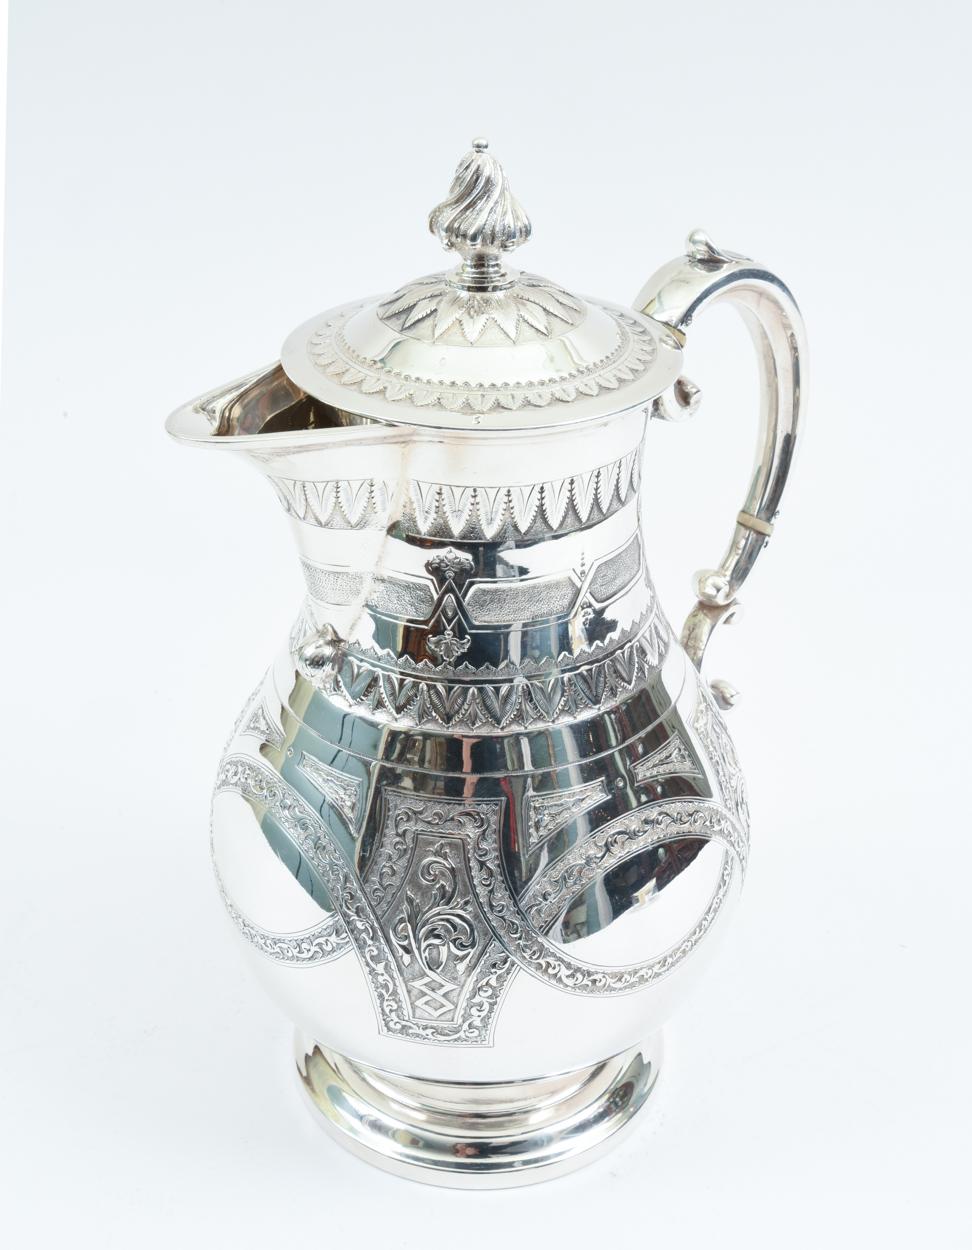 English silver plate tea or coffee pot with exterior design details. The tea or coffee pot is in excellent condition, minor wear consistent with use / age. The pot stand about 11 inches high x 9 inches diameter.